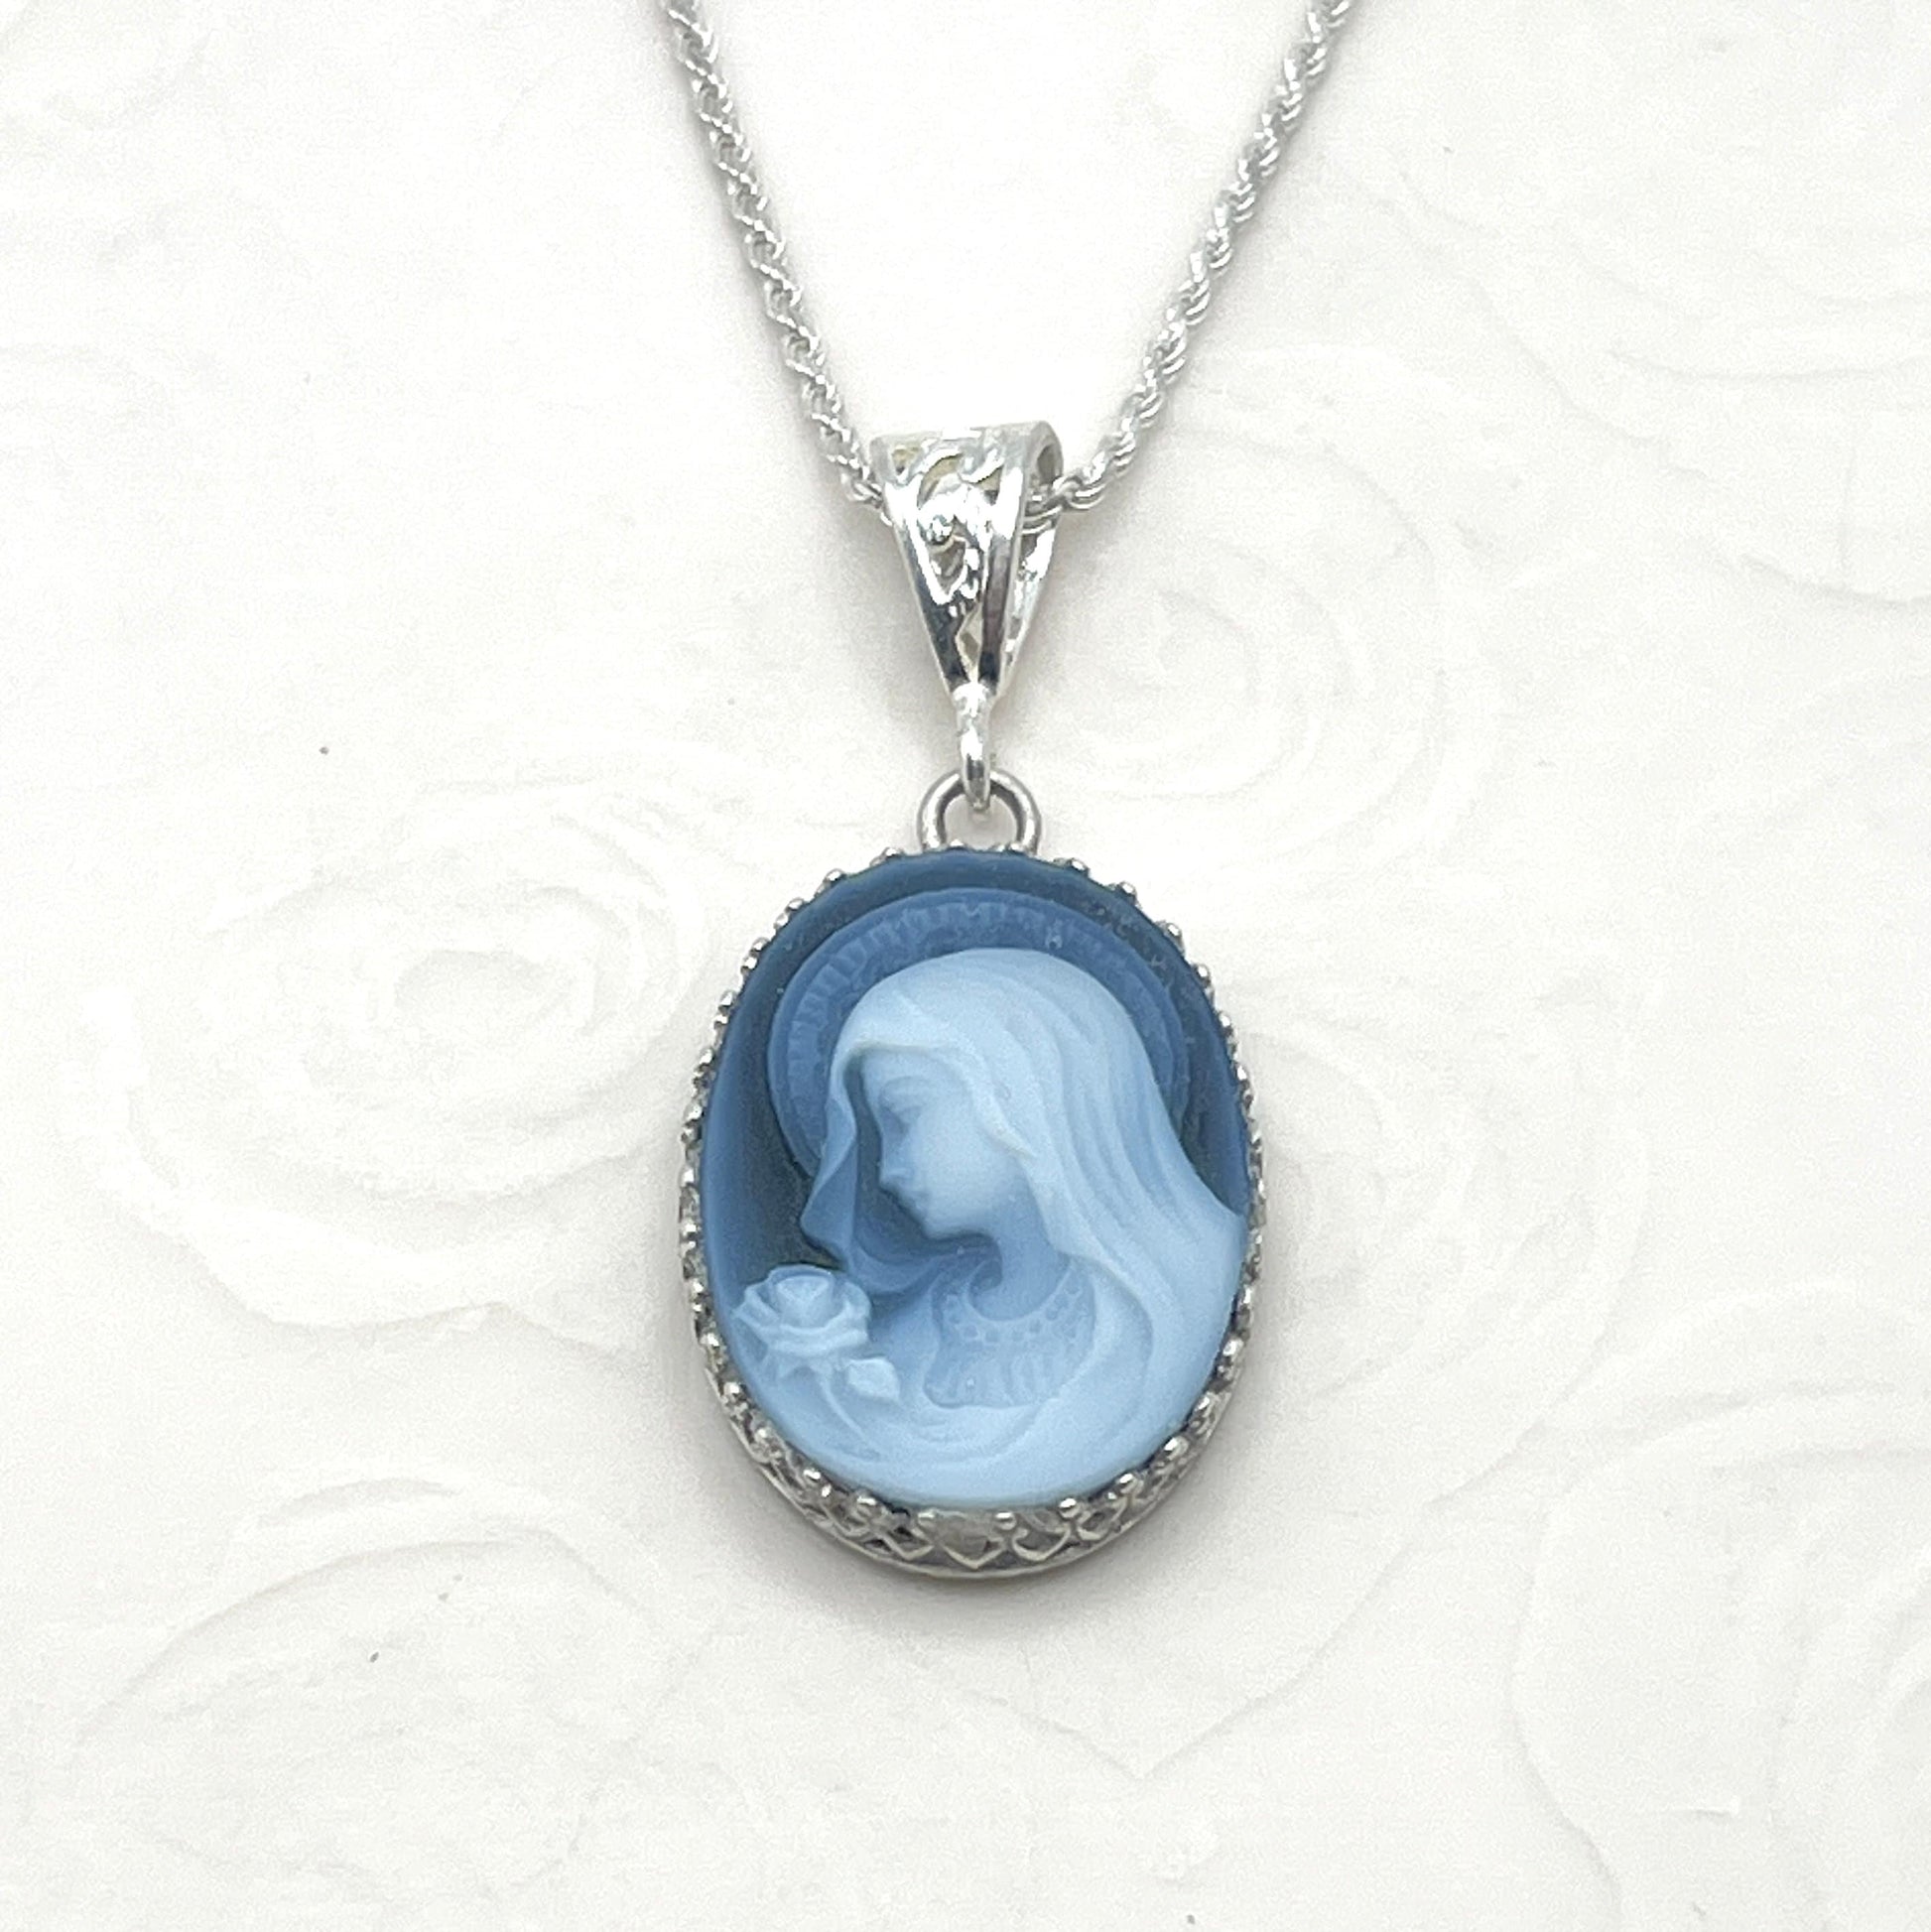 Blessed Mother Mary Blue Cameo Necklace, Religious Jewelry, Gifts for Women, Gemstone Cameo, Easter Jewelry Gifts